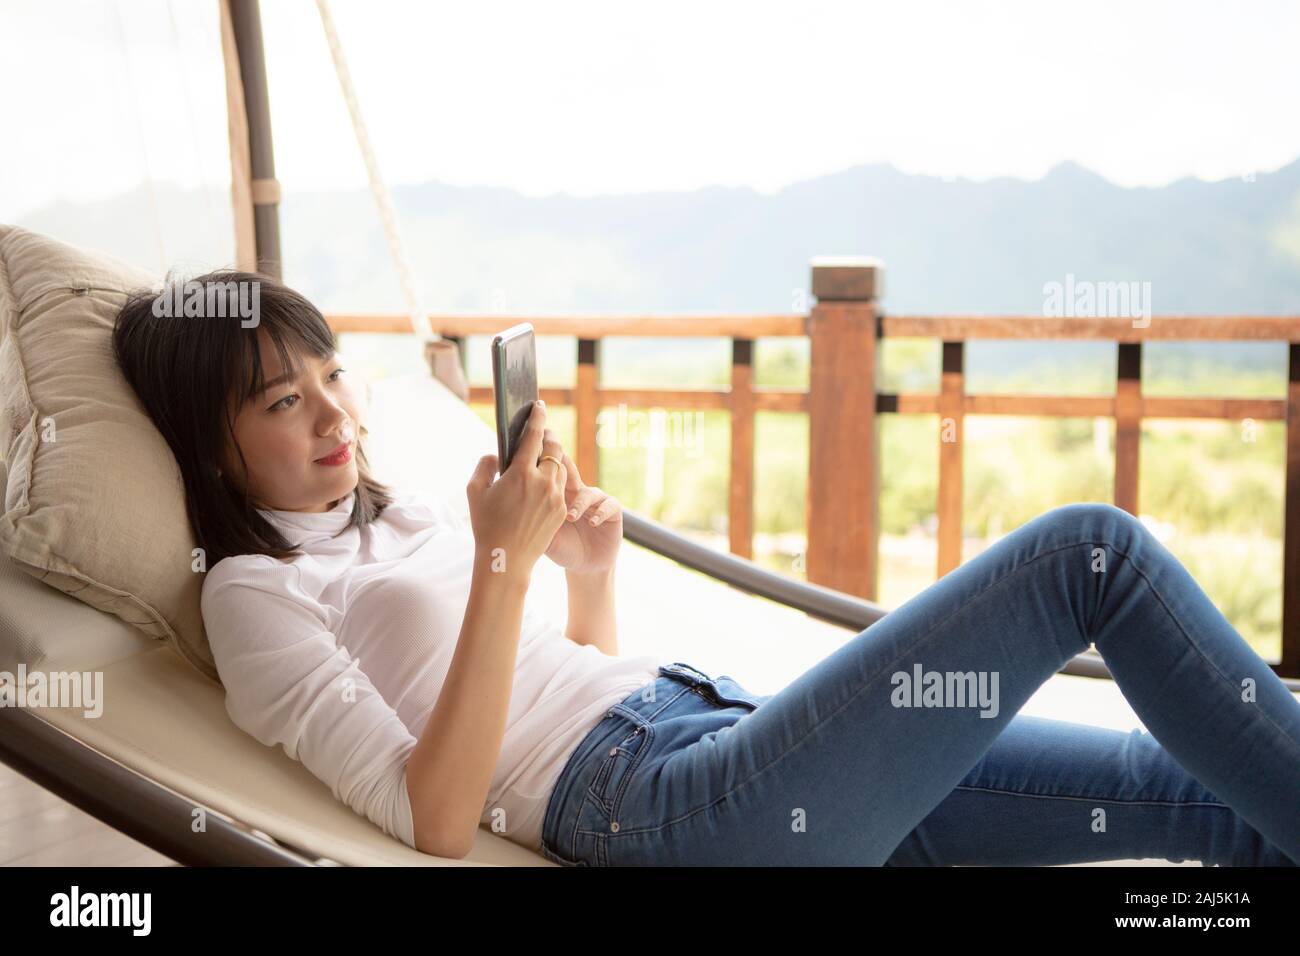 asian younger woman toothy smiling with happiness holding smart phone in hand ,relaxing lifestyle Stock Photo